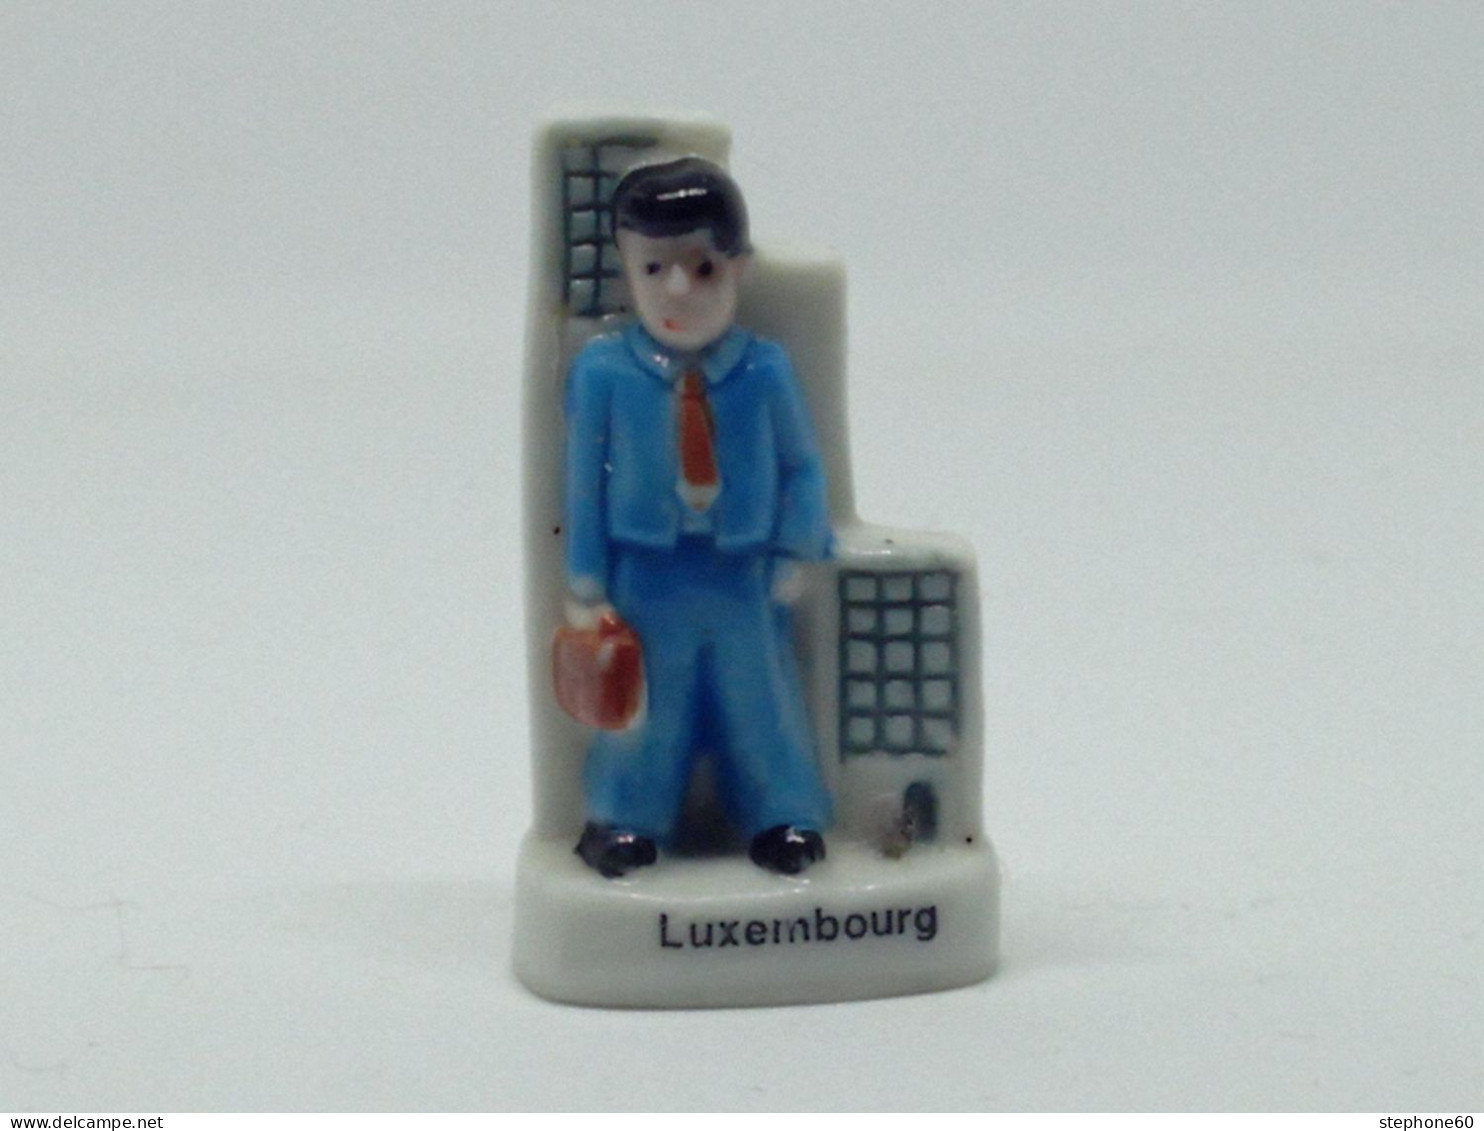 A002 - (21) Feve Pays Luxembourg Personnage - Pays